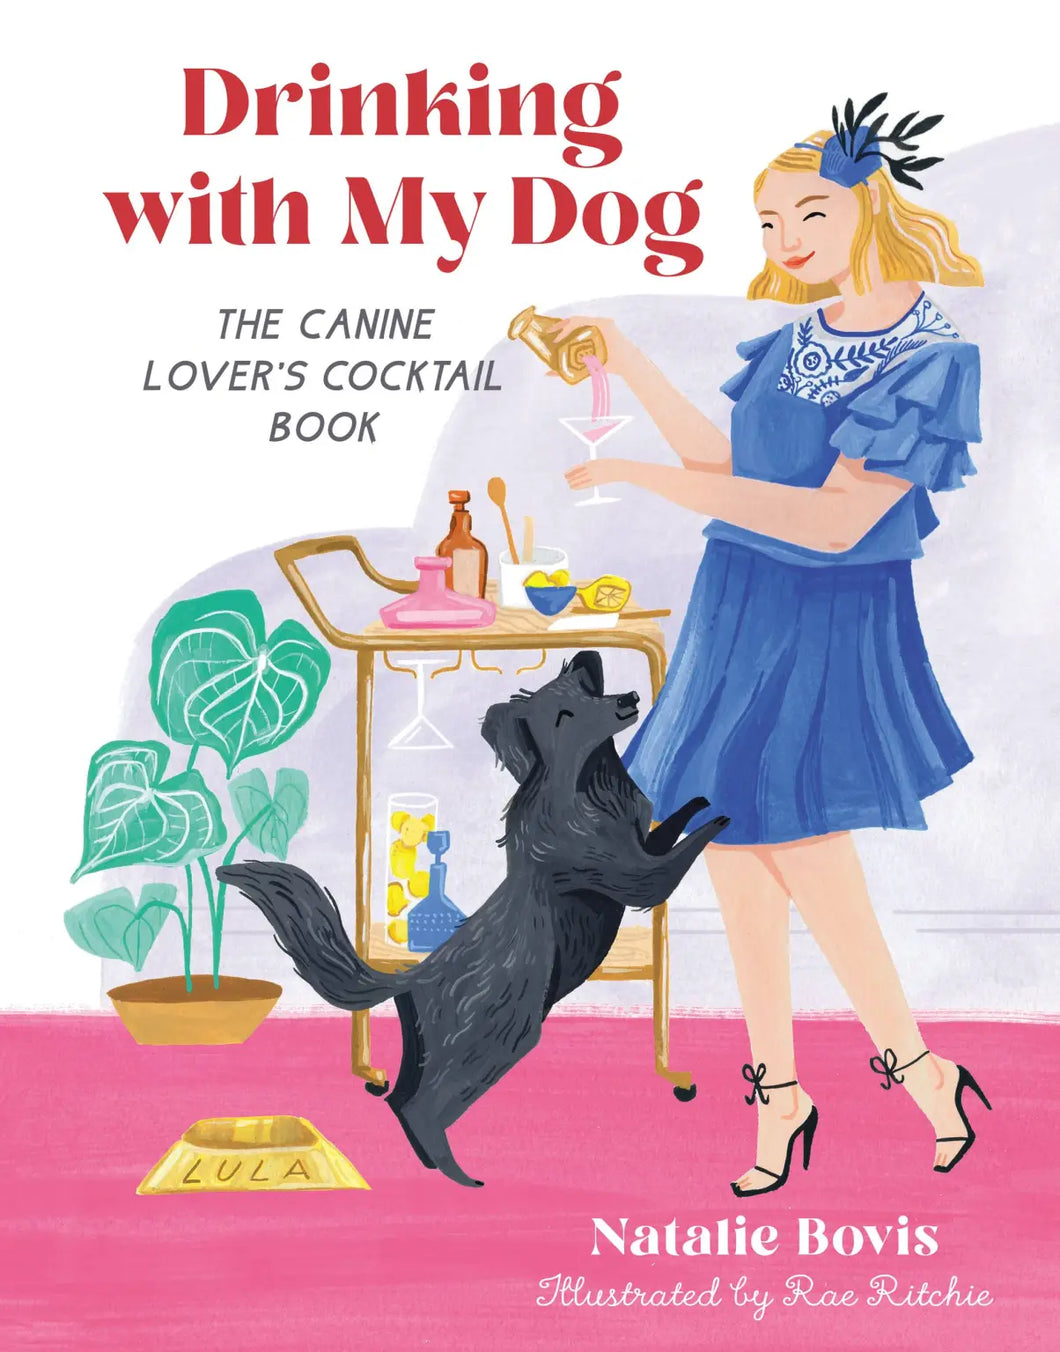 Drinking with my Dog-A canine lover's cocktail book